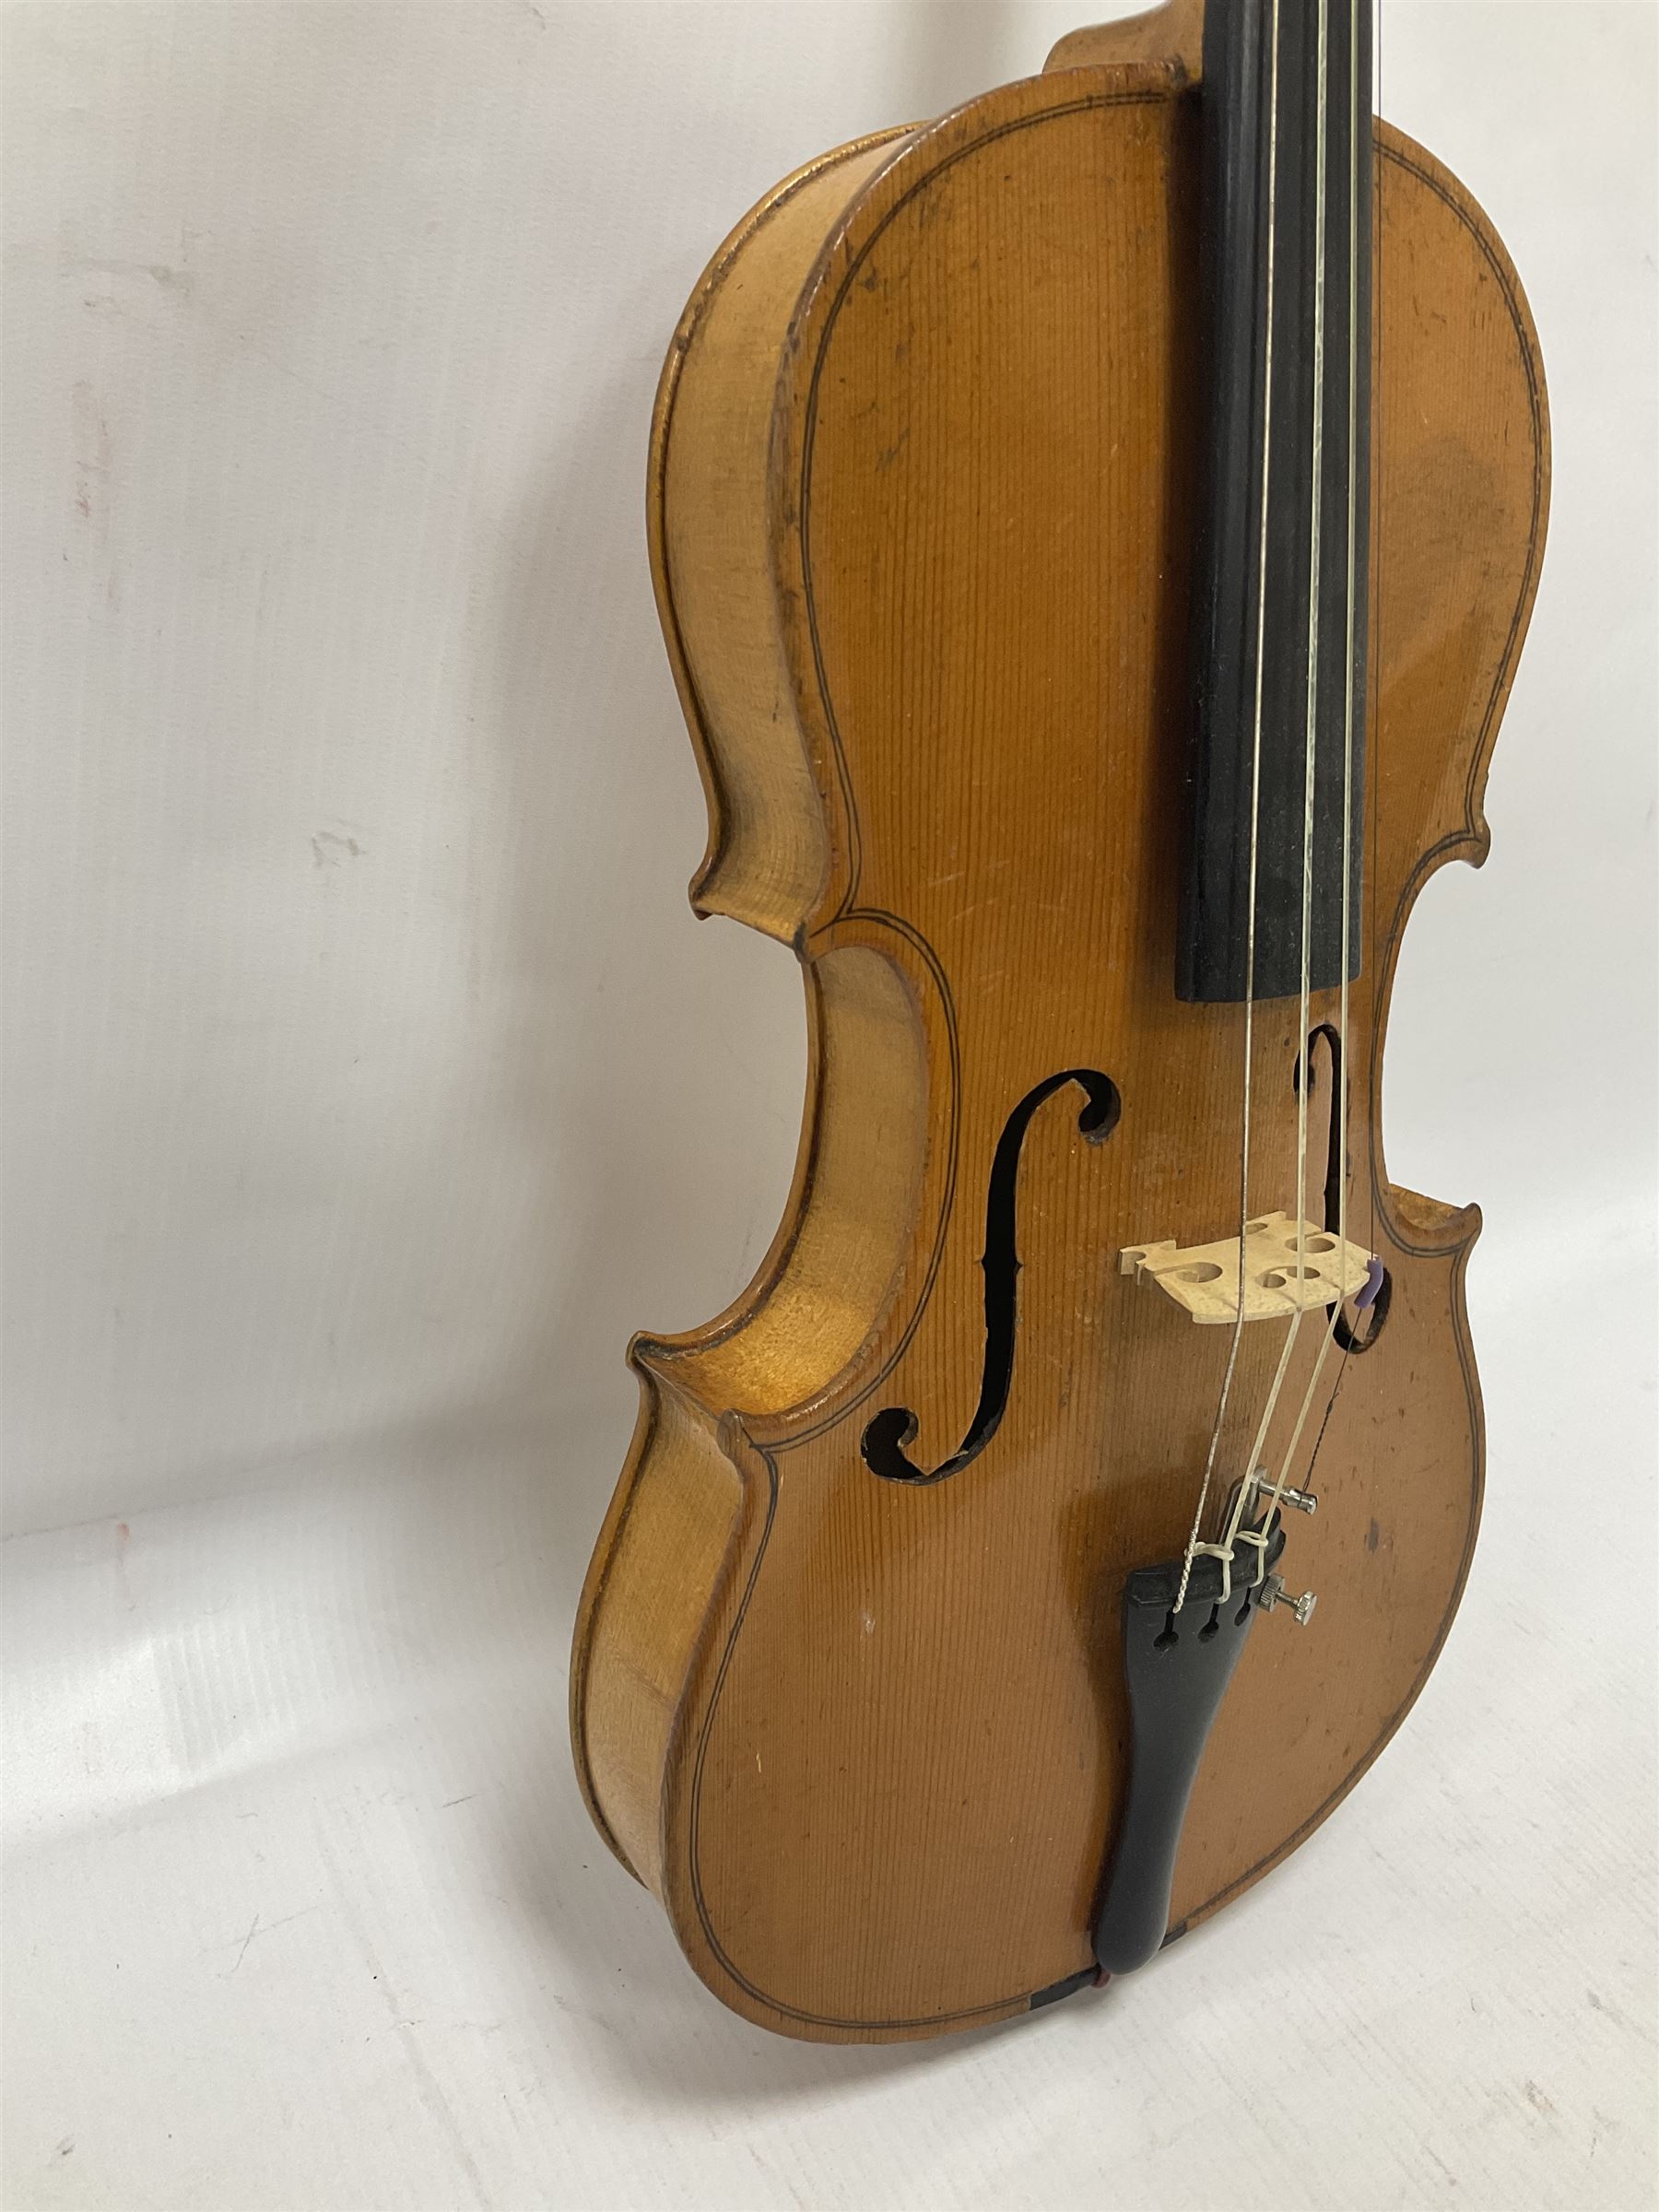 19th century 3/4 size violin in its original fitted wooden “coffin case” Overall length 53cm No bow - Image 13 of 16